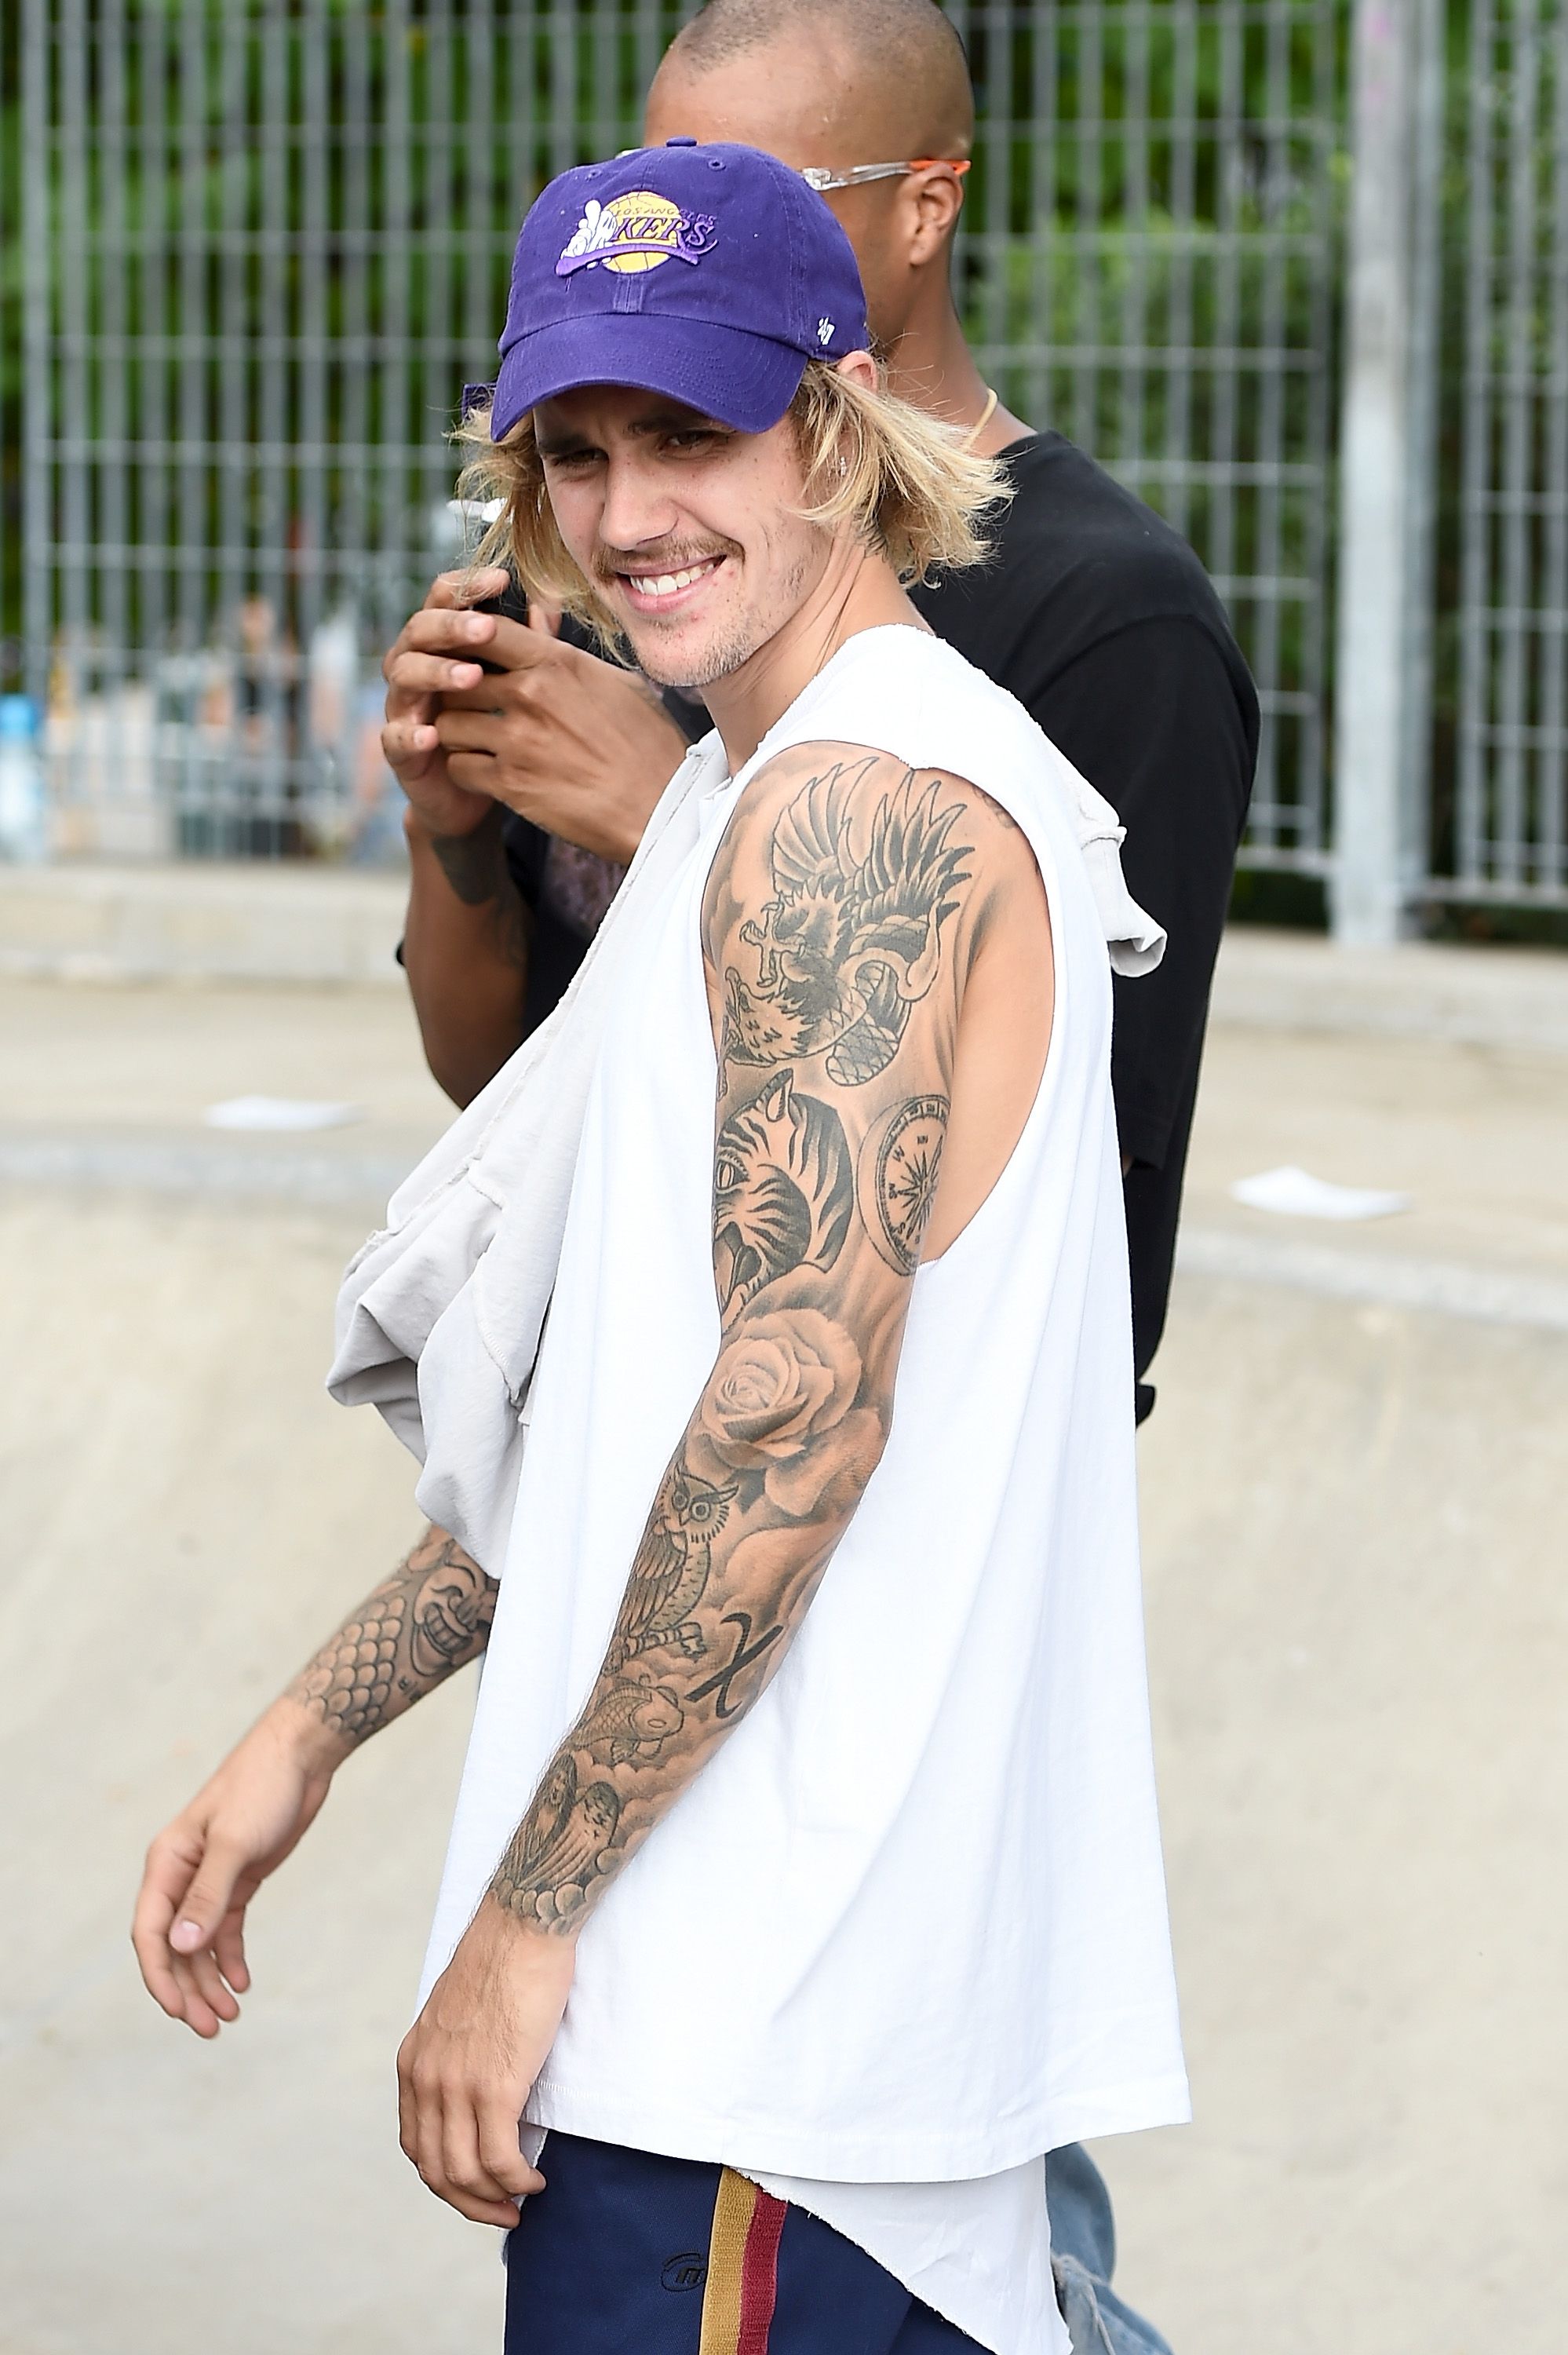 Justin Bieber's New Face Tattoo Has Special New Year Meaning